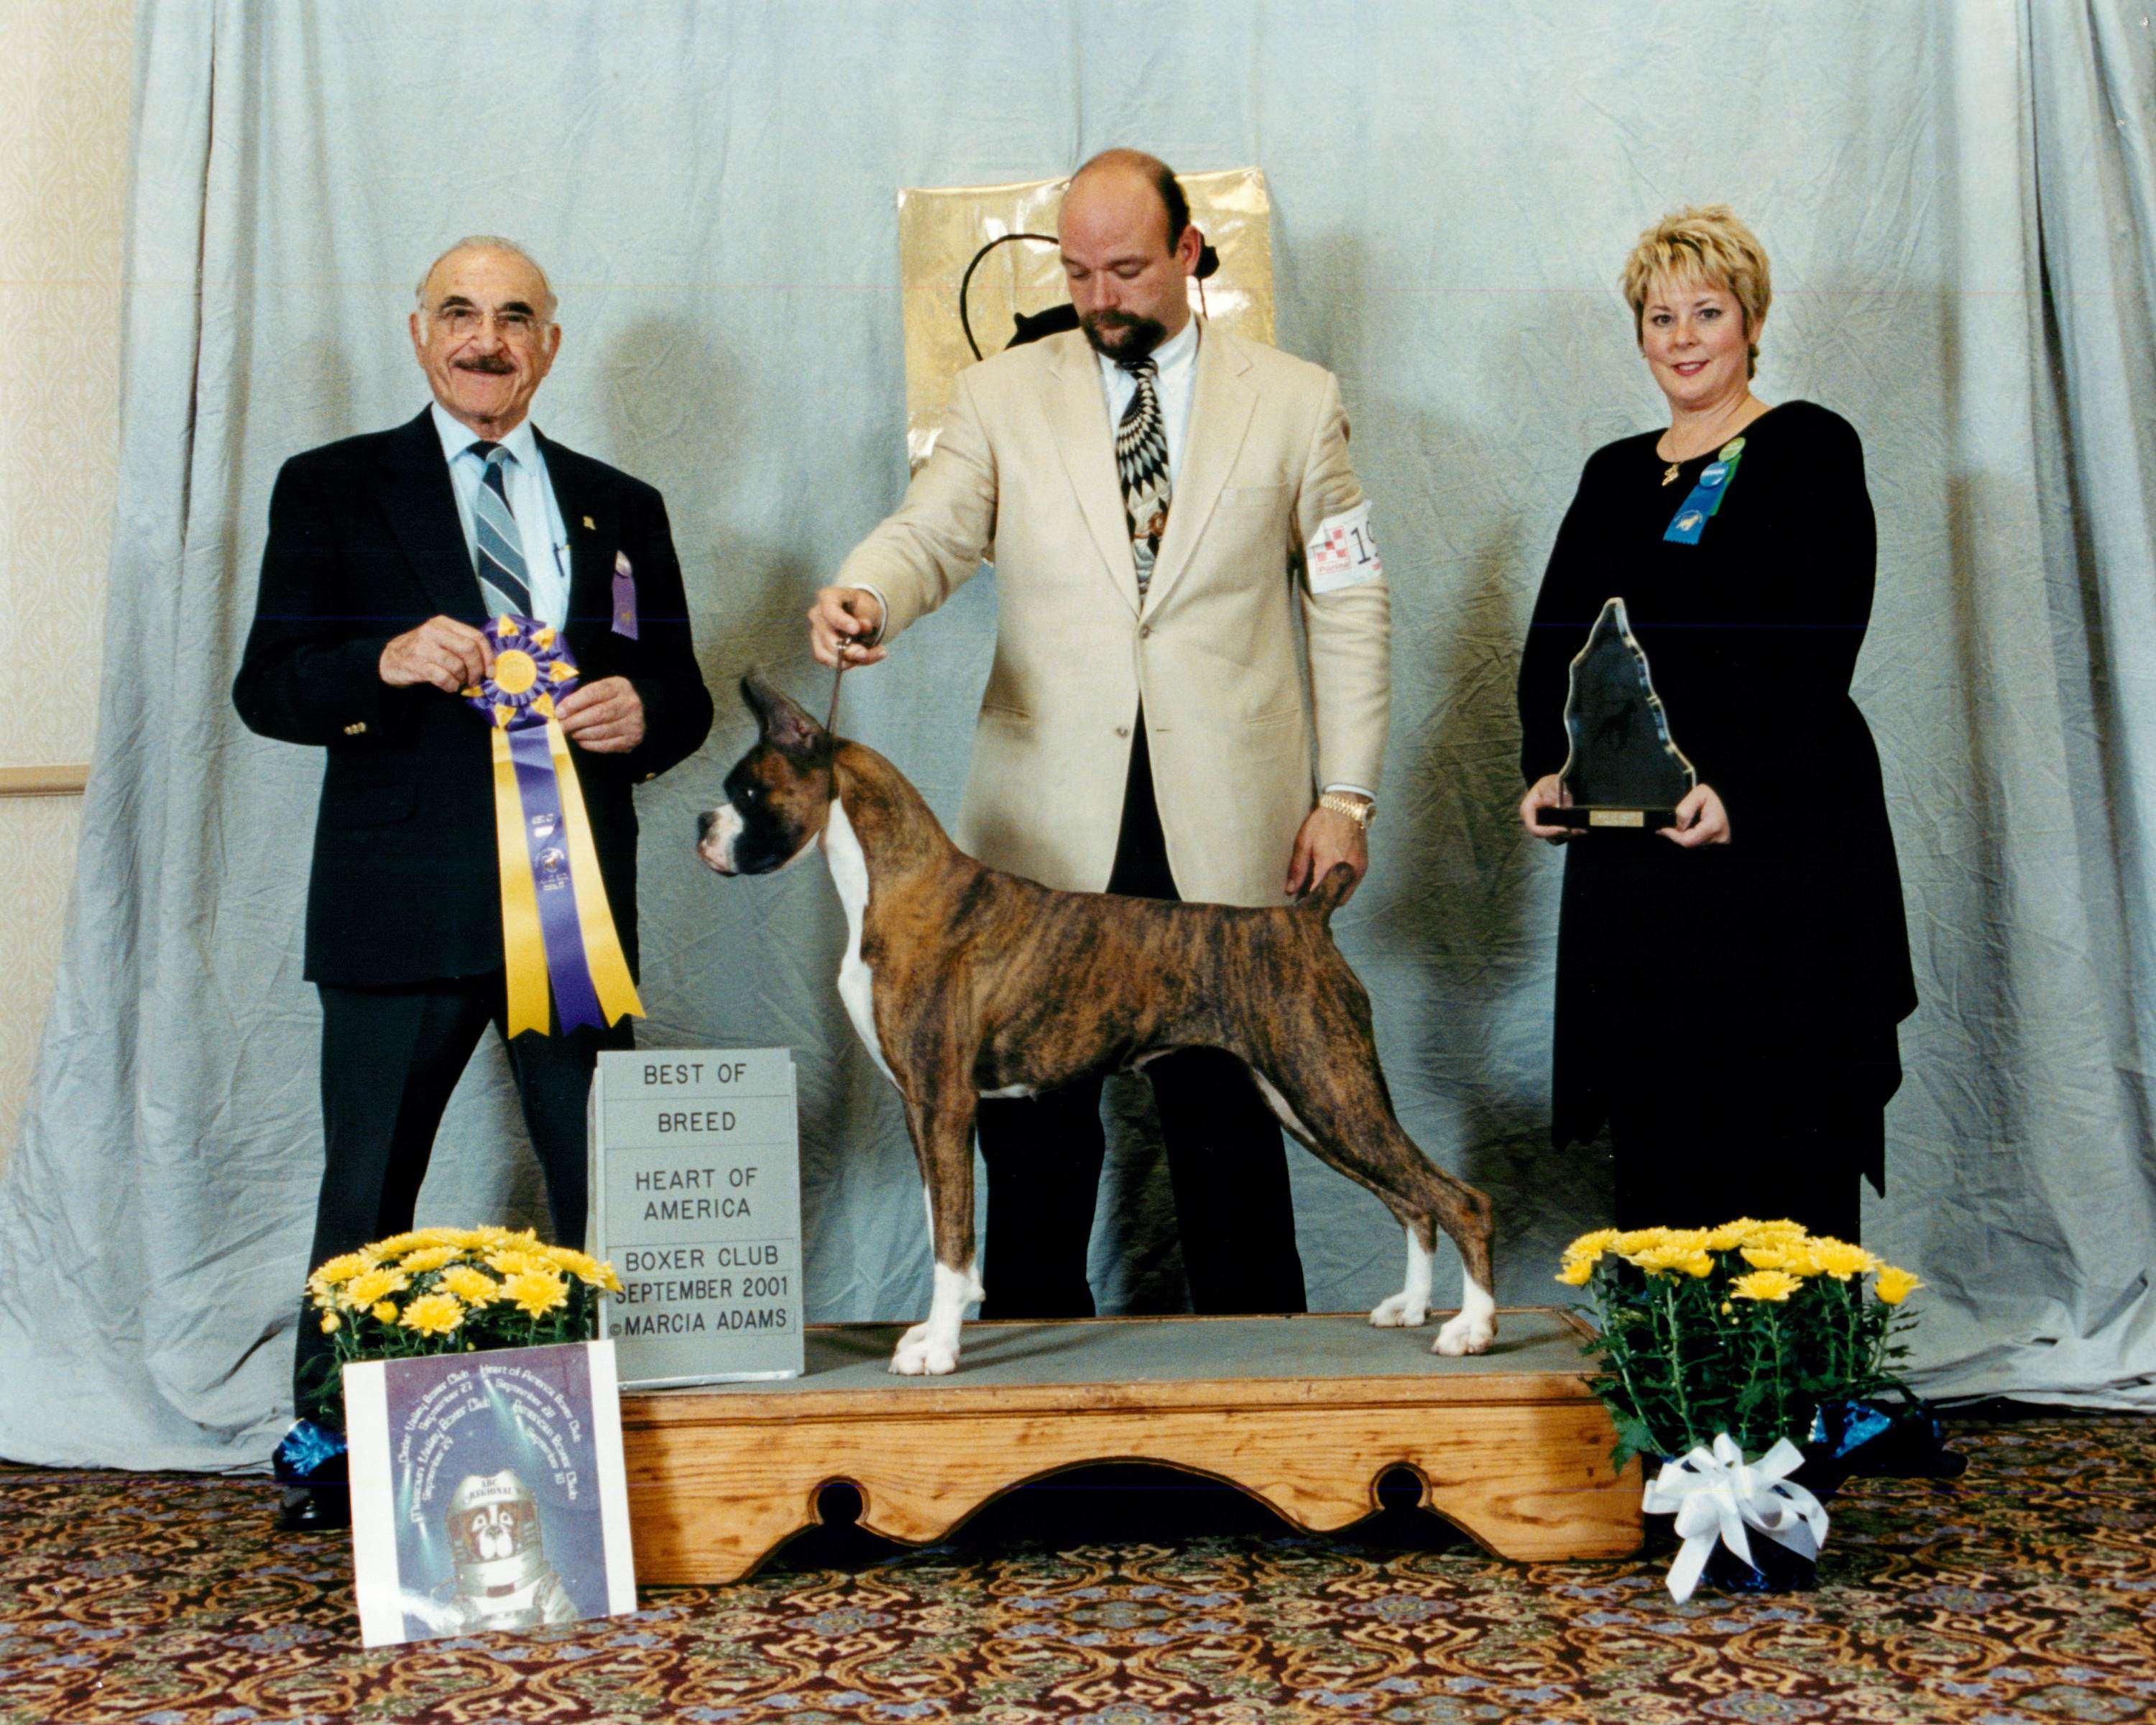 Best of Breed @ 2001 Specialty Show #2